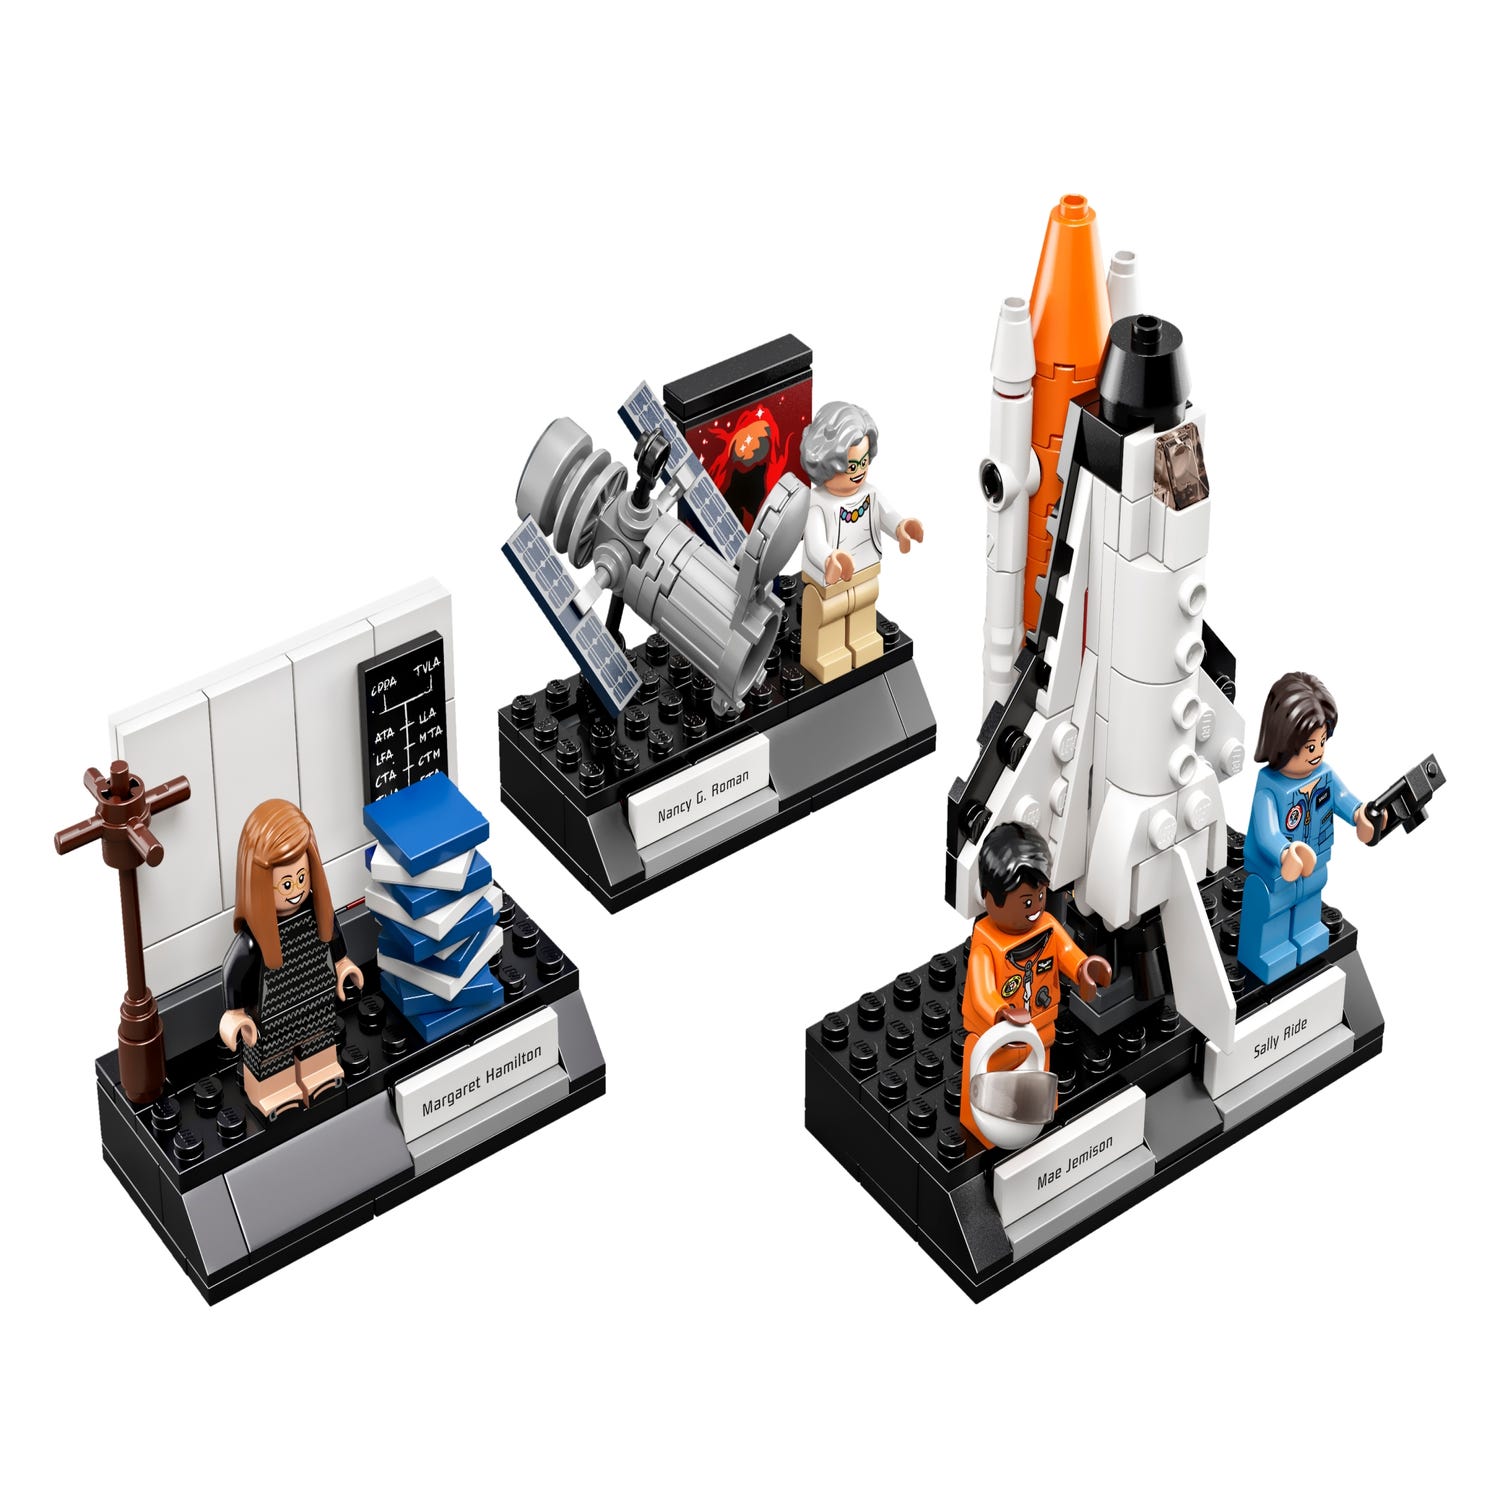 Women of NASA 21312 | Ideas | Buy online at the Official LEGO® Shop US